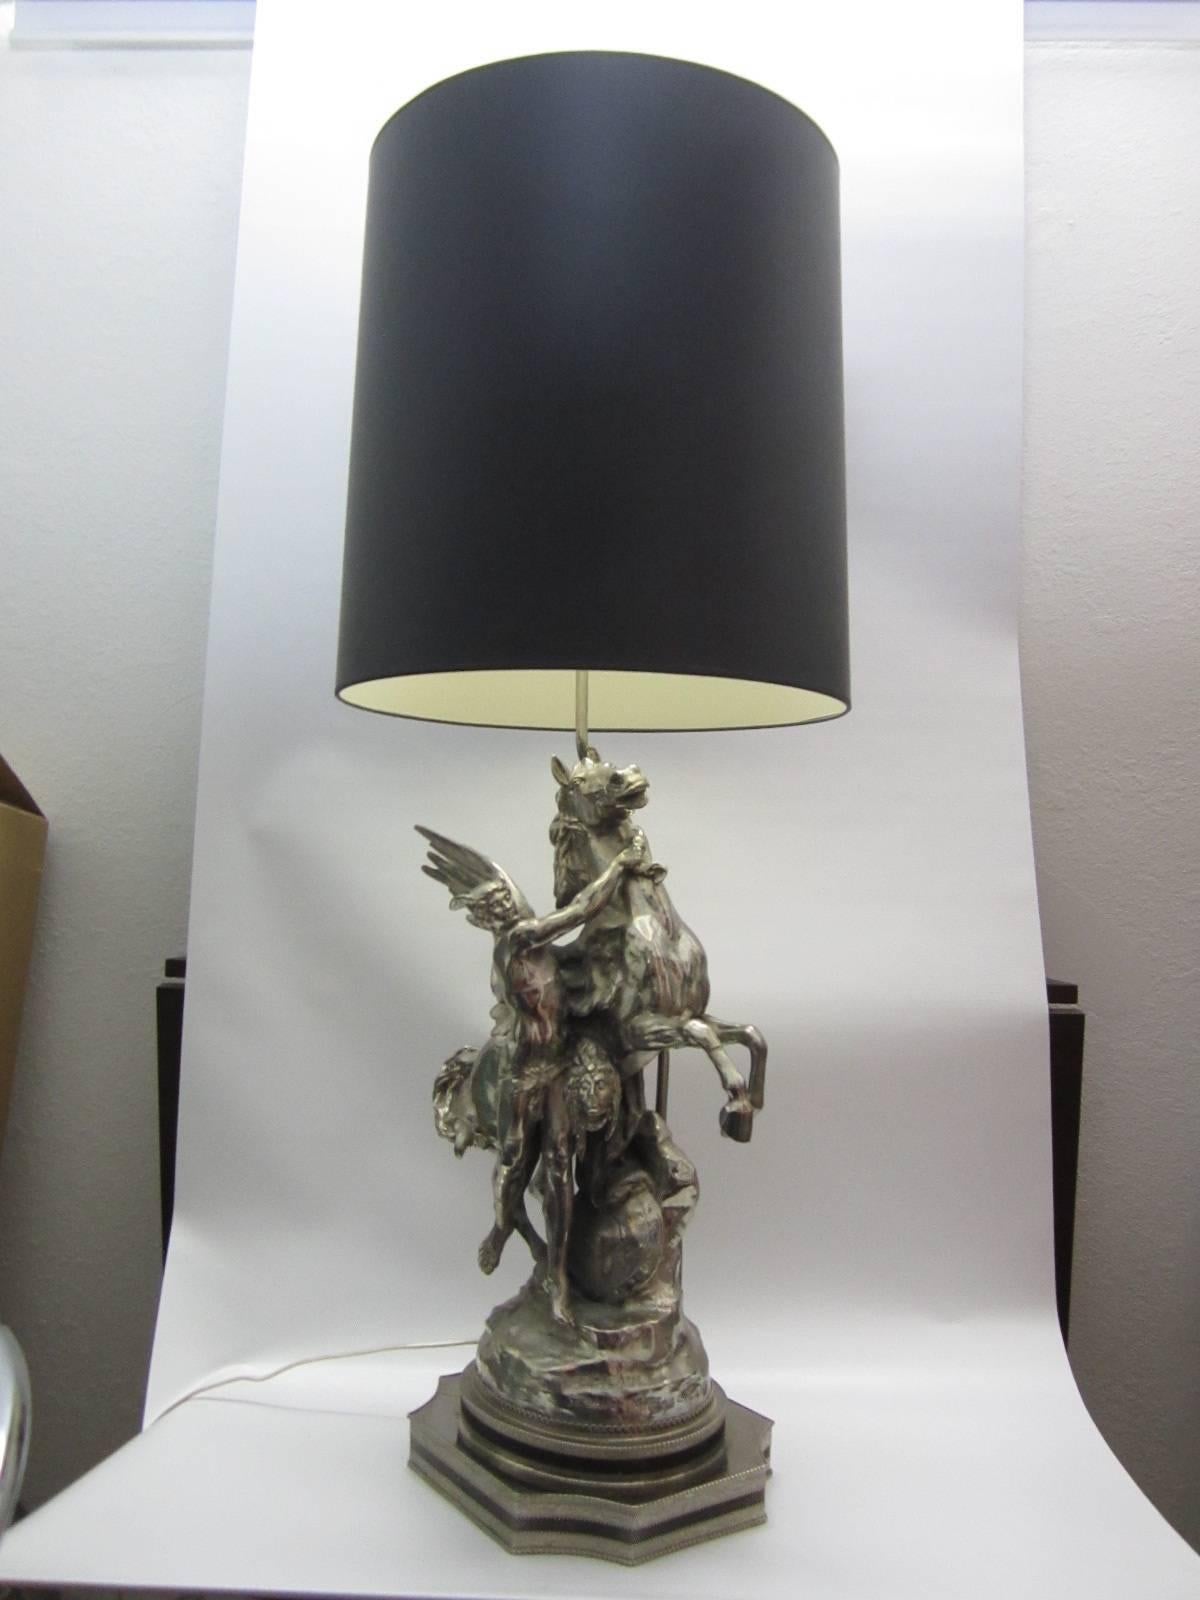 Pegasus table lamp in nickeled metal with black shade. The beautiful Greek Mythical Hero Bellerophon is also handsomely depicted holding Pegasus. Fantastic detail all around and signed on the back. Original condition with a fantastic appearance.